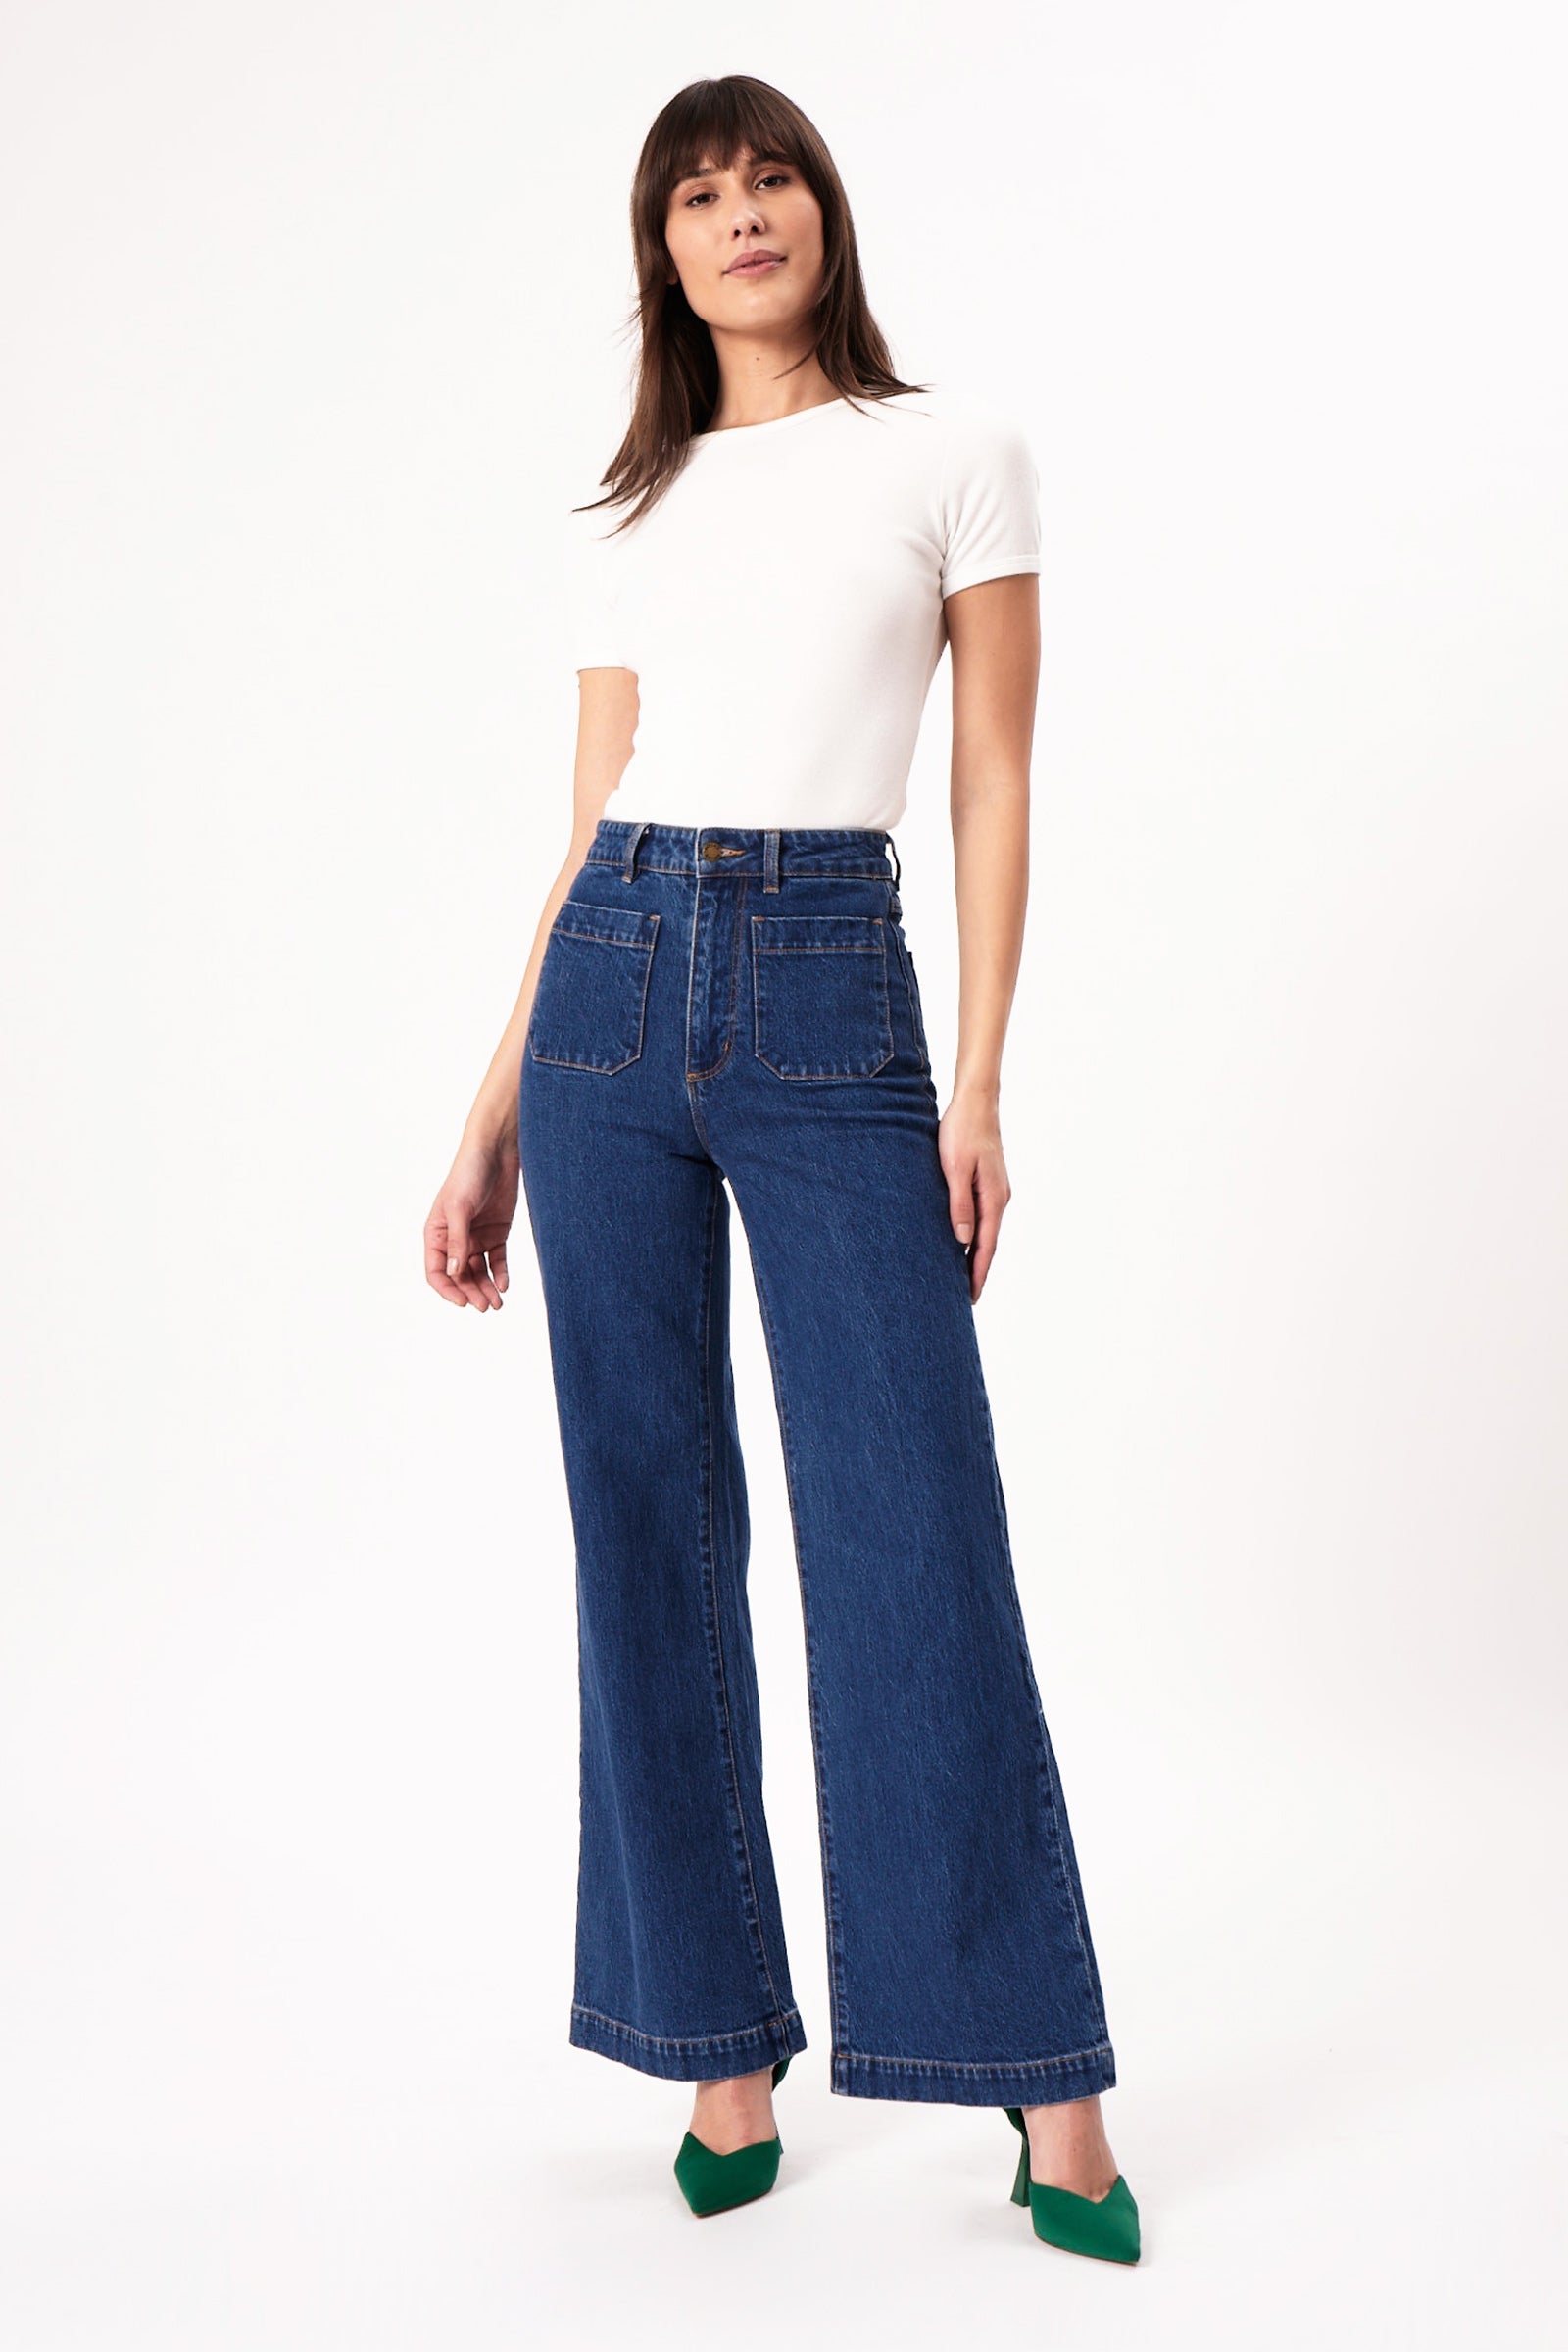 New Fashionable Womens Denim Wide Leg Pants with Button Embellished Front  Pockets  China Denim and Pants price  MadeinChinacom